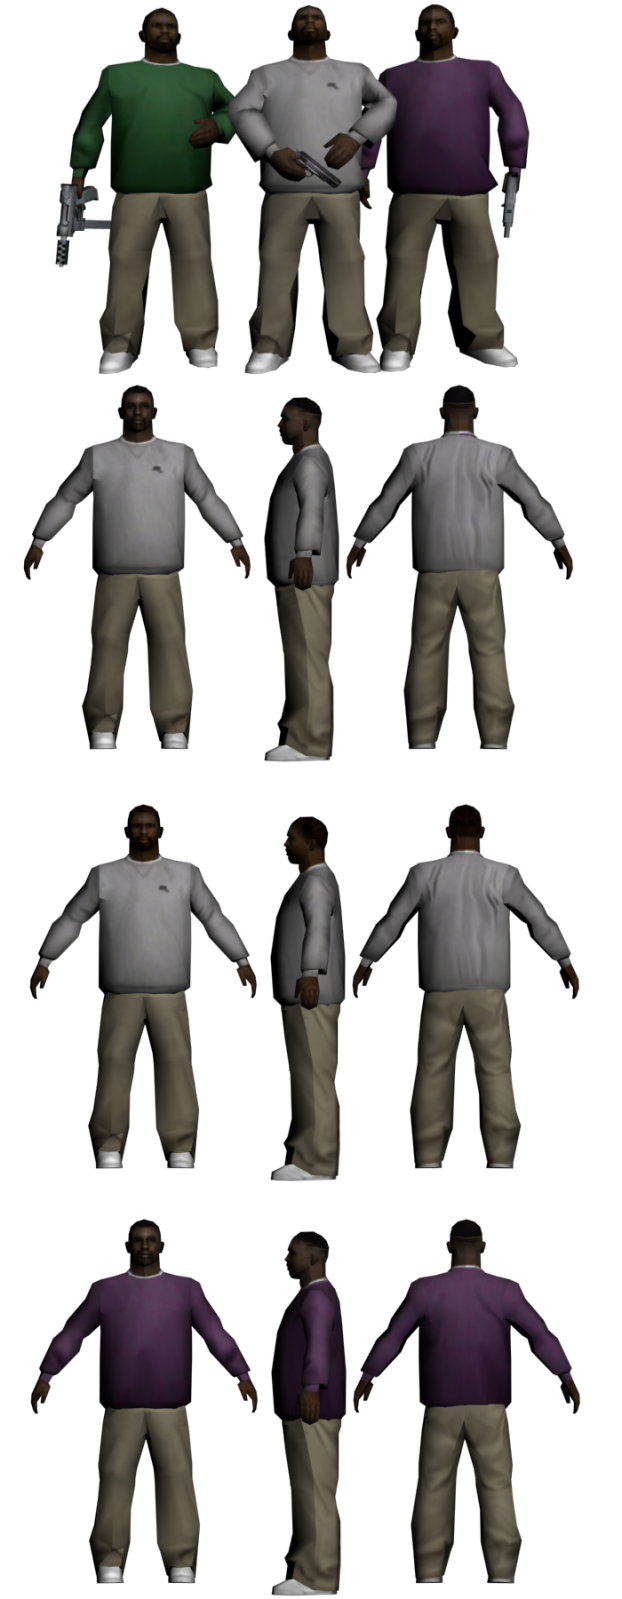 Modpack, afro-américain, low poly skins Fwlk4w